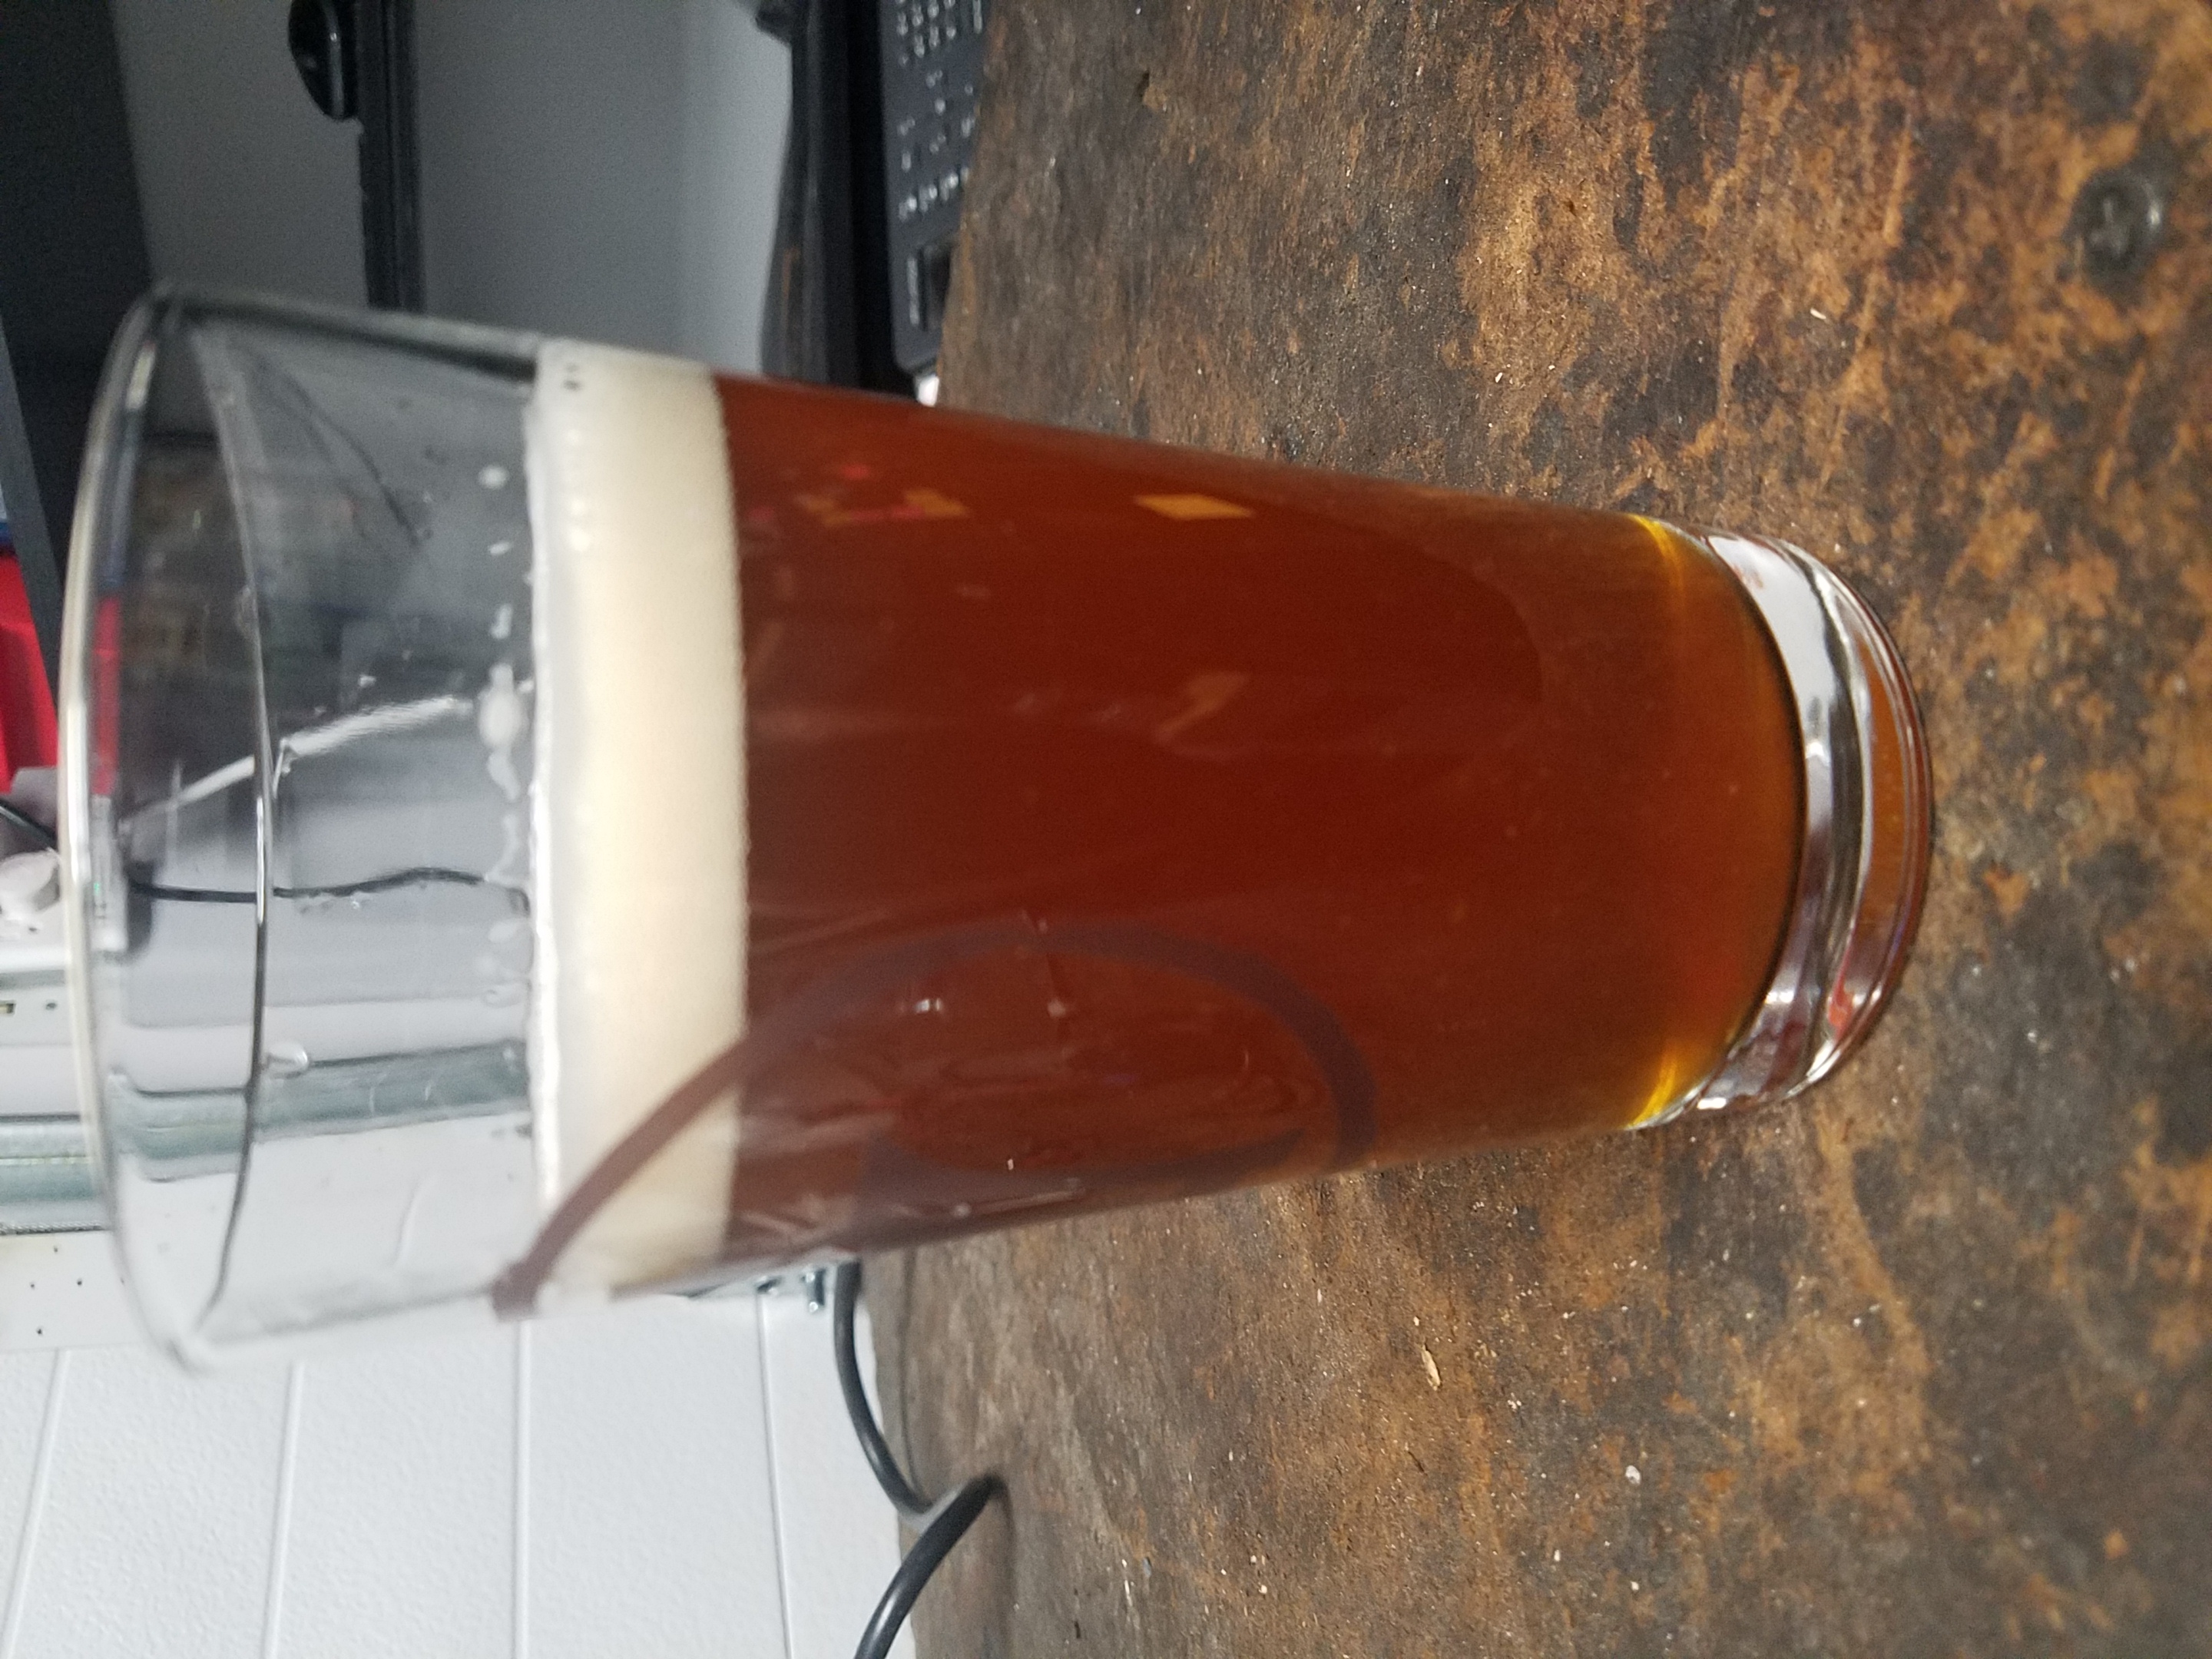 Northern Brewer "Kama Citra" Session IPA (currently on tap)